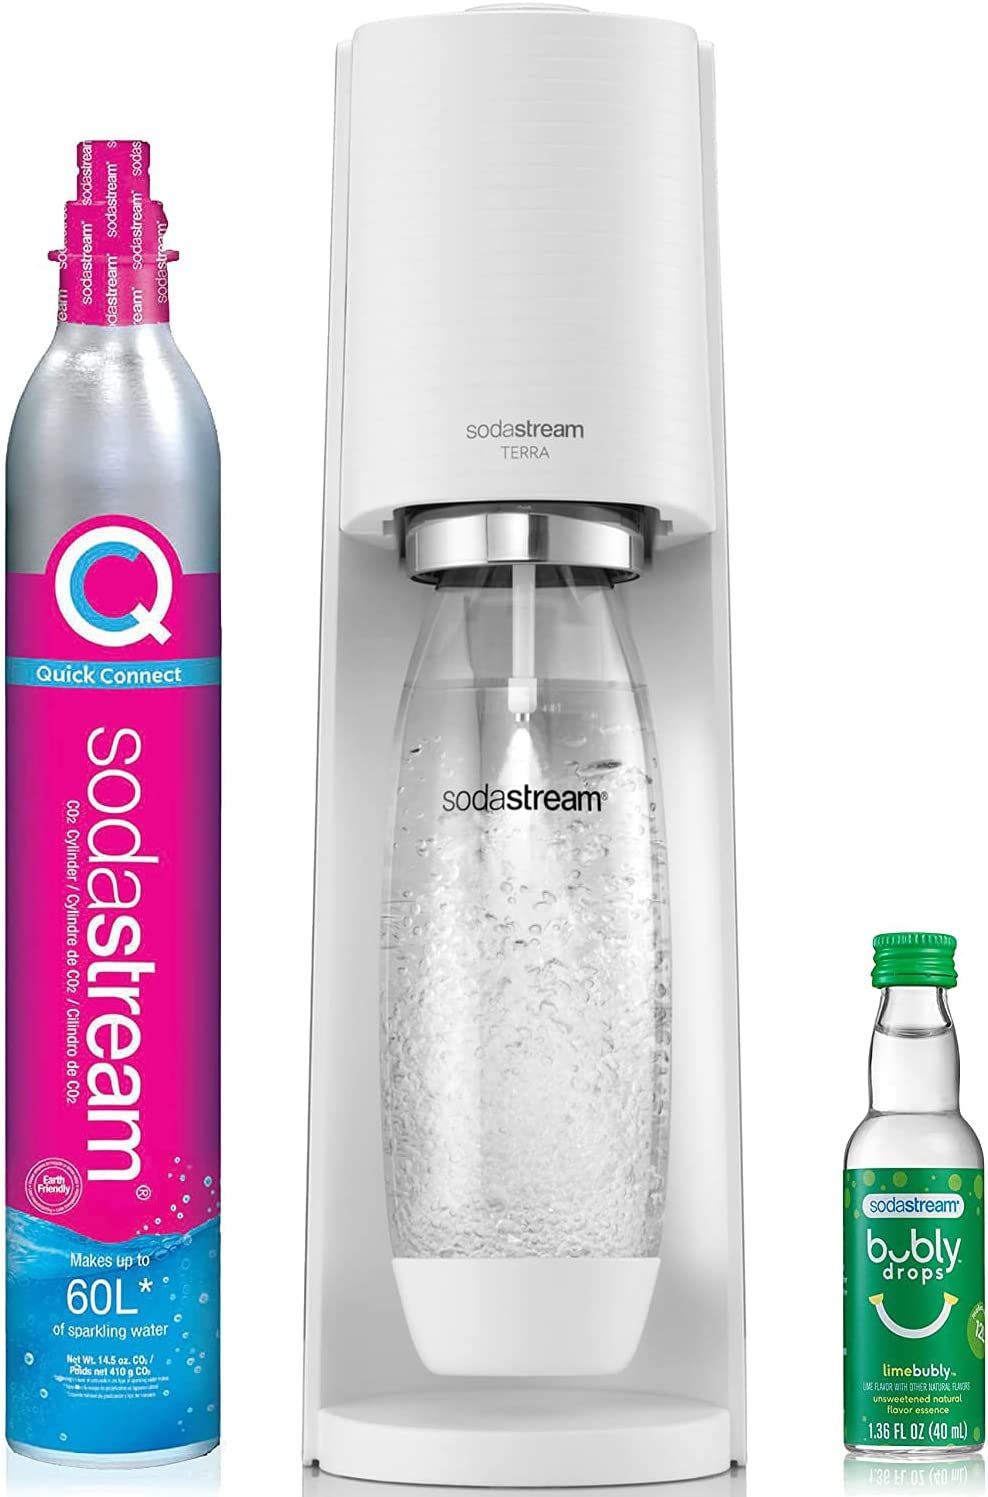 SodaStream Terra Sparkling Water Maker (White) with CO2, DWS Bottle and Bubly Drop | Amazon (US)